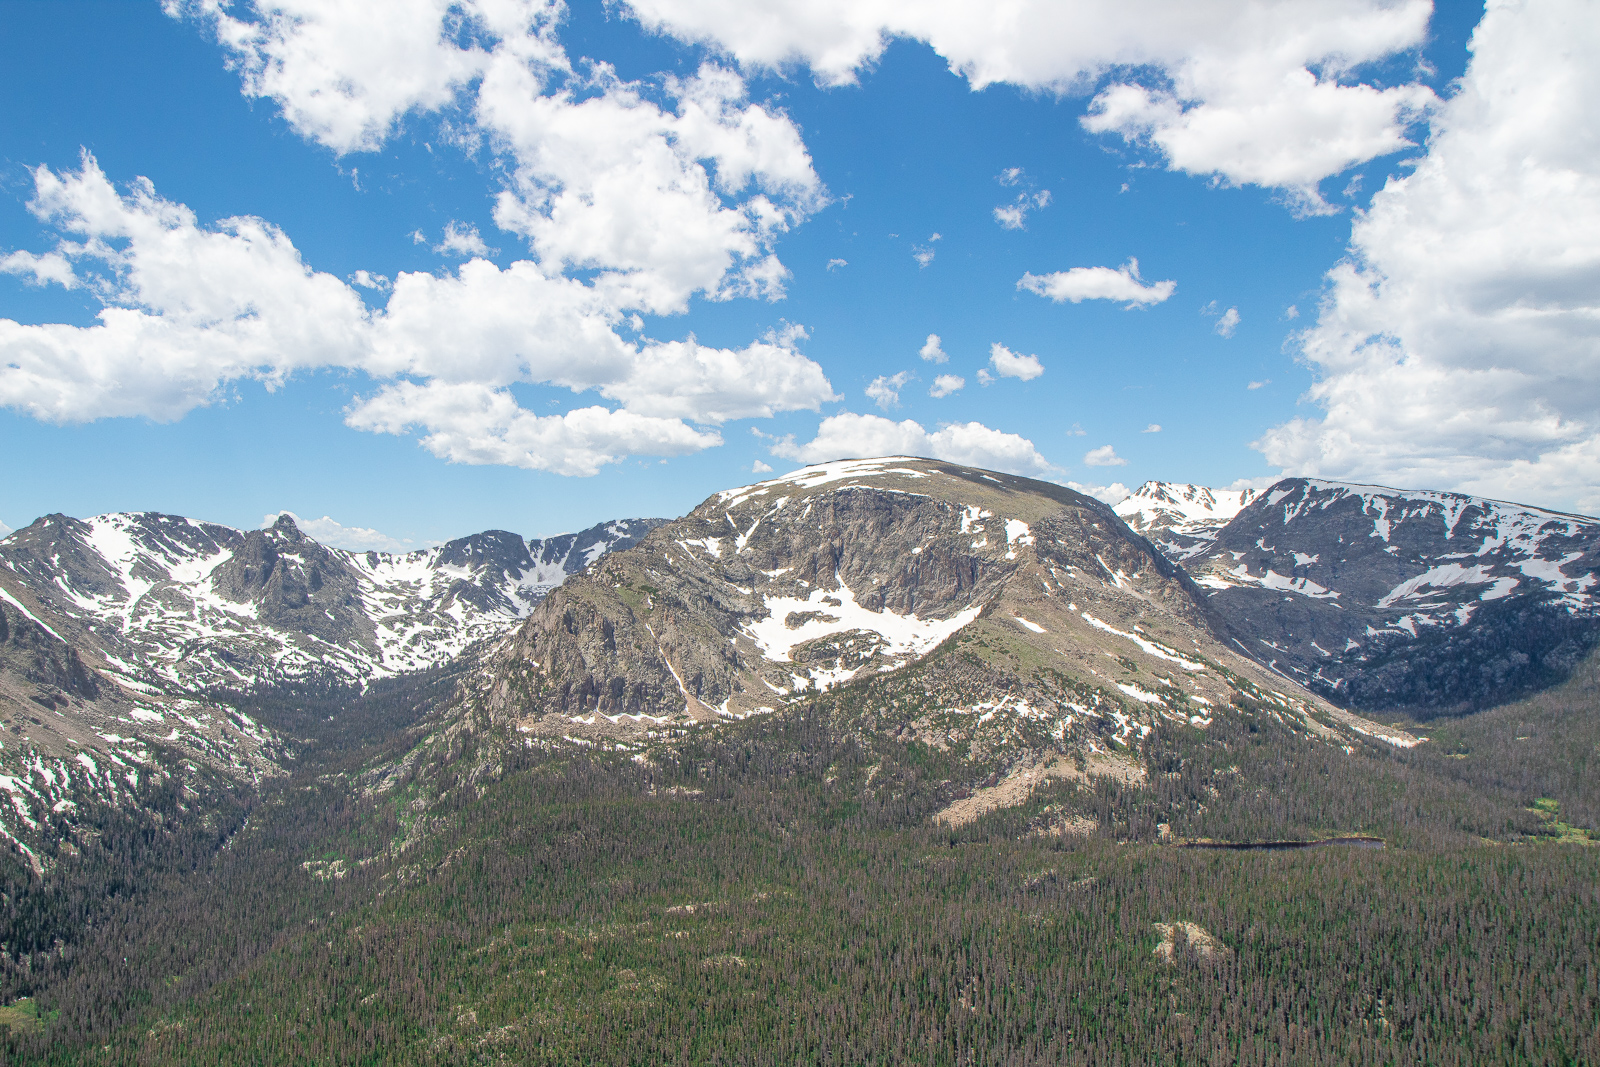 Forest Canyon Overlook on Trail Ridge Road in Rocky Mountain National Park